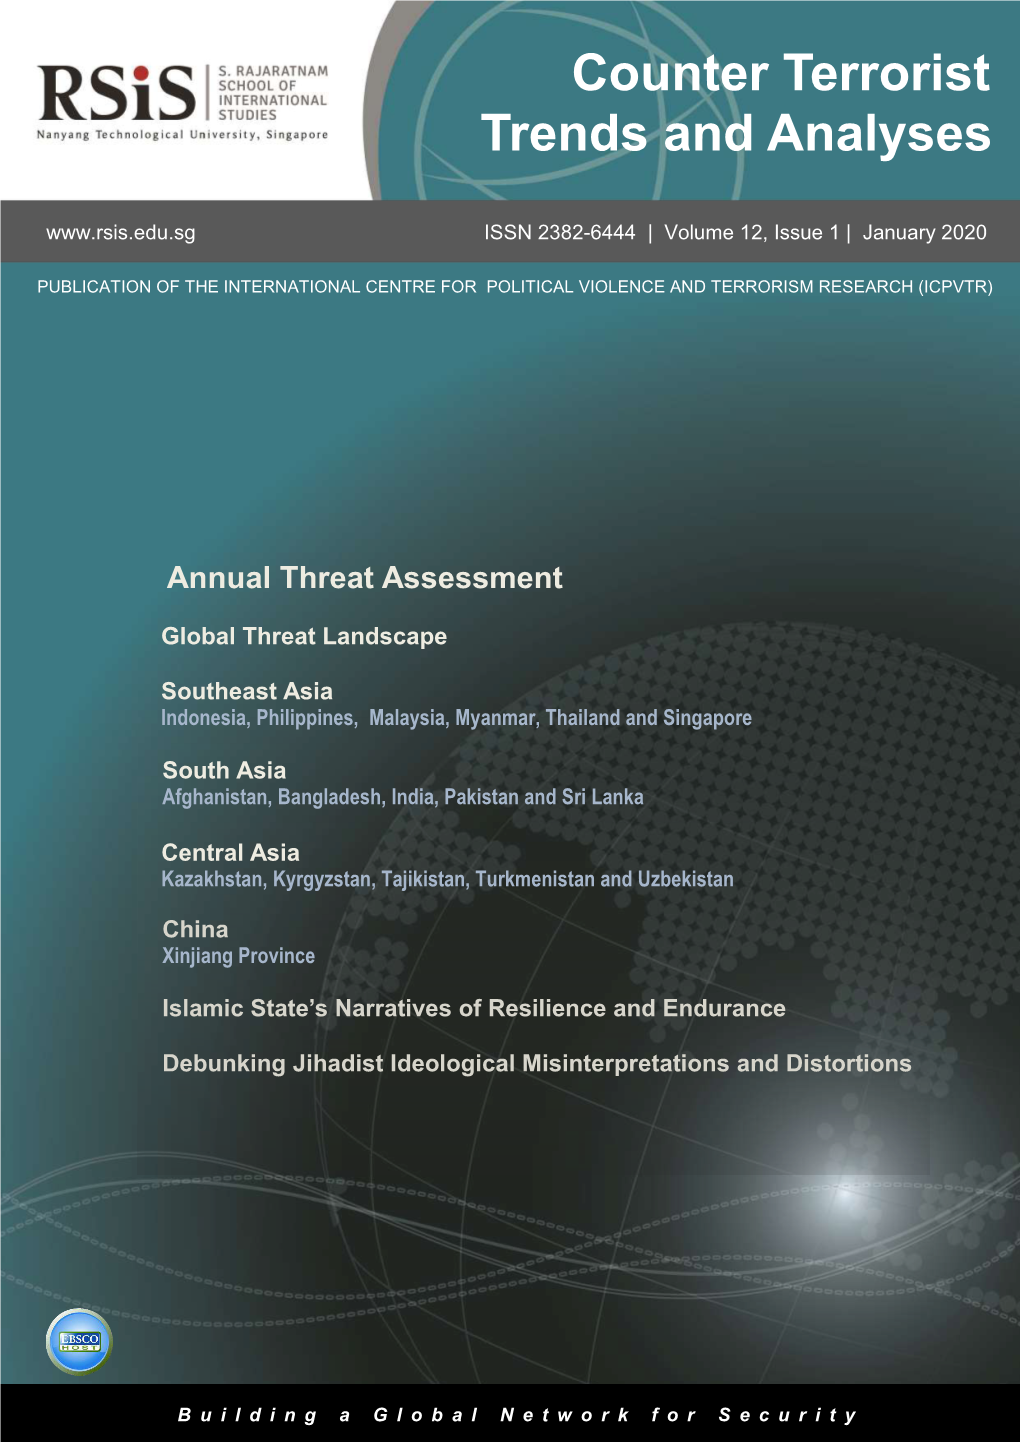 Counter Terrorist Trends and Analyses